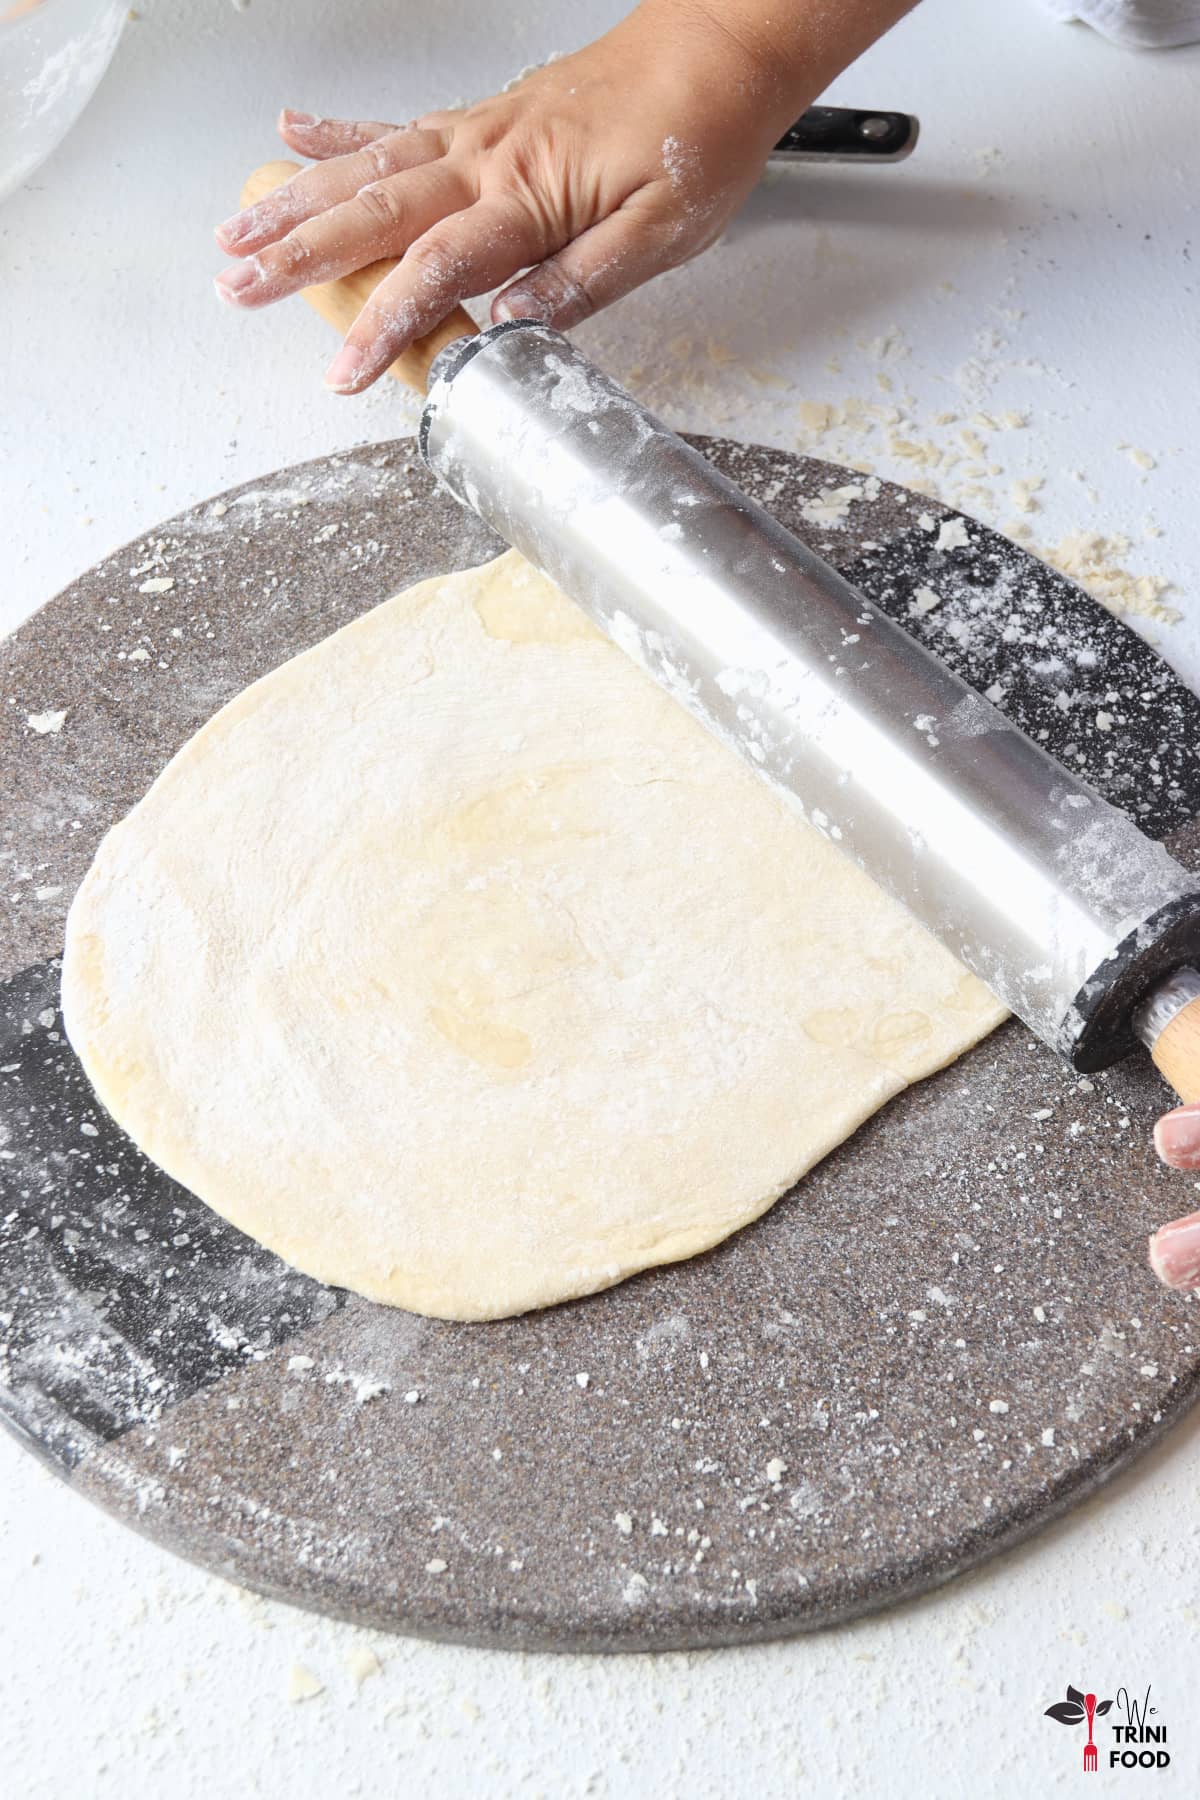 rolling out buss up shut dough ball for cooking with rolling pin